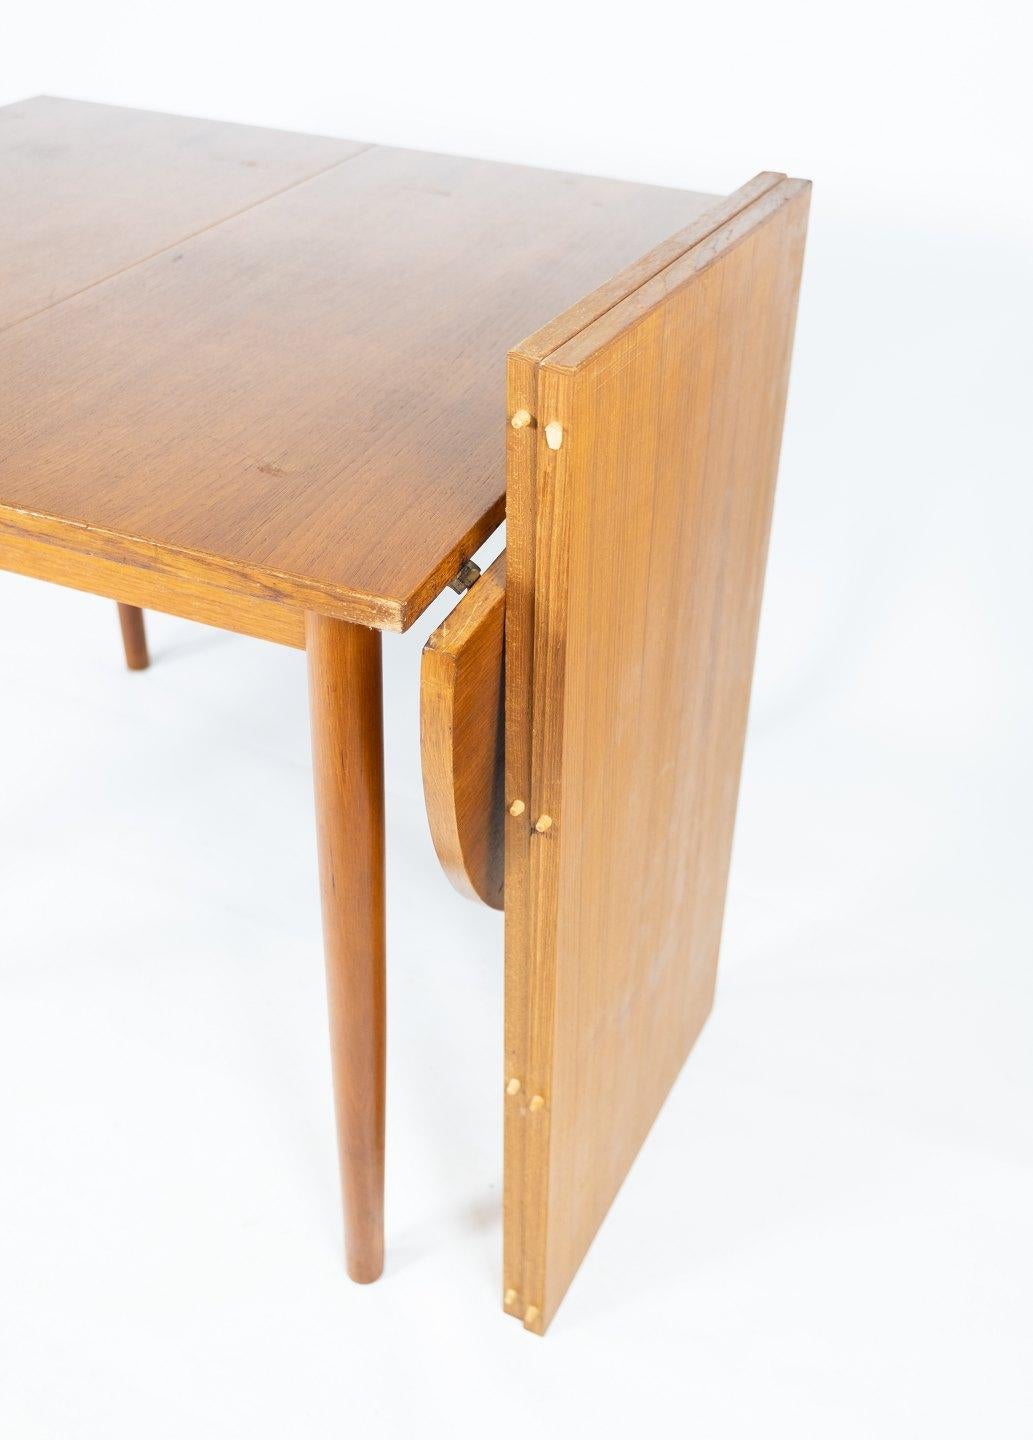 Mid-20th Century Dining Table in Teak Designed by Arne Vodder from the 1960s For Sale